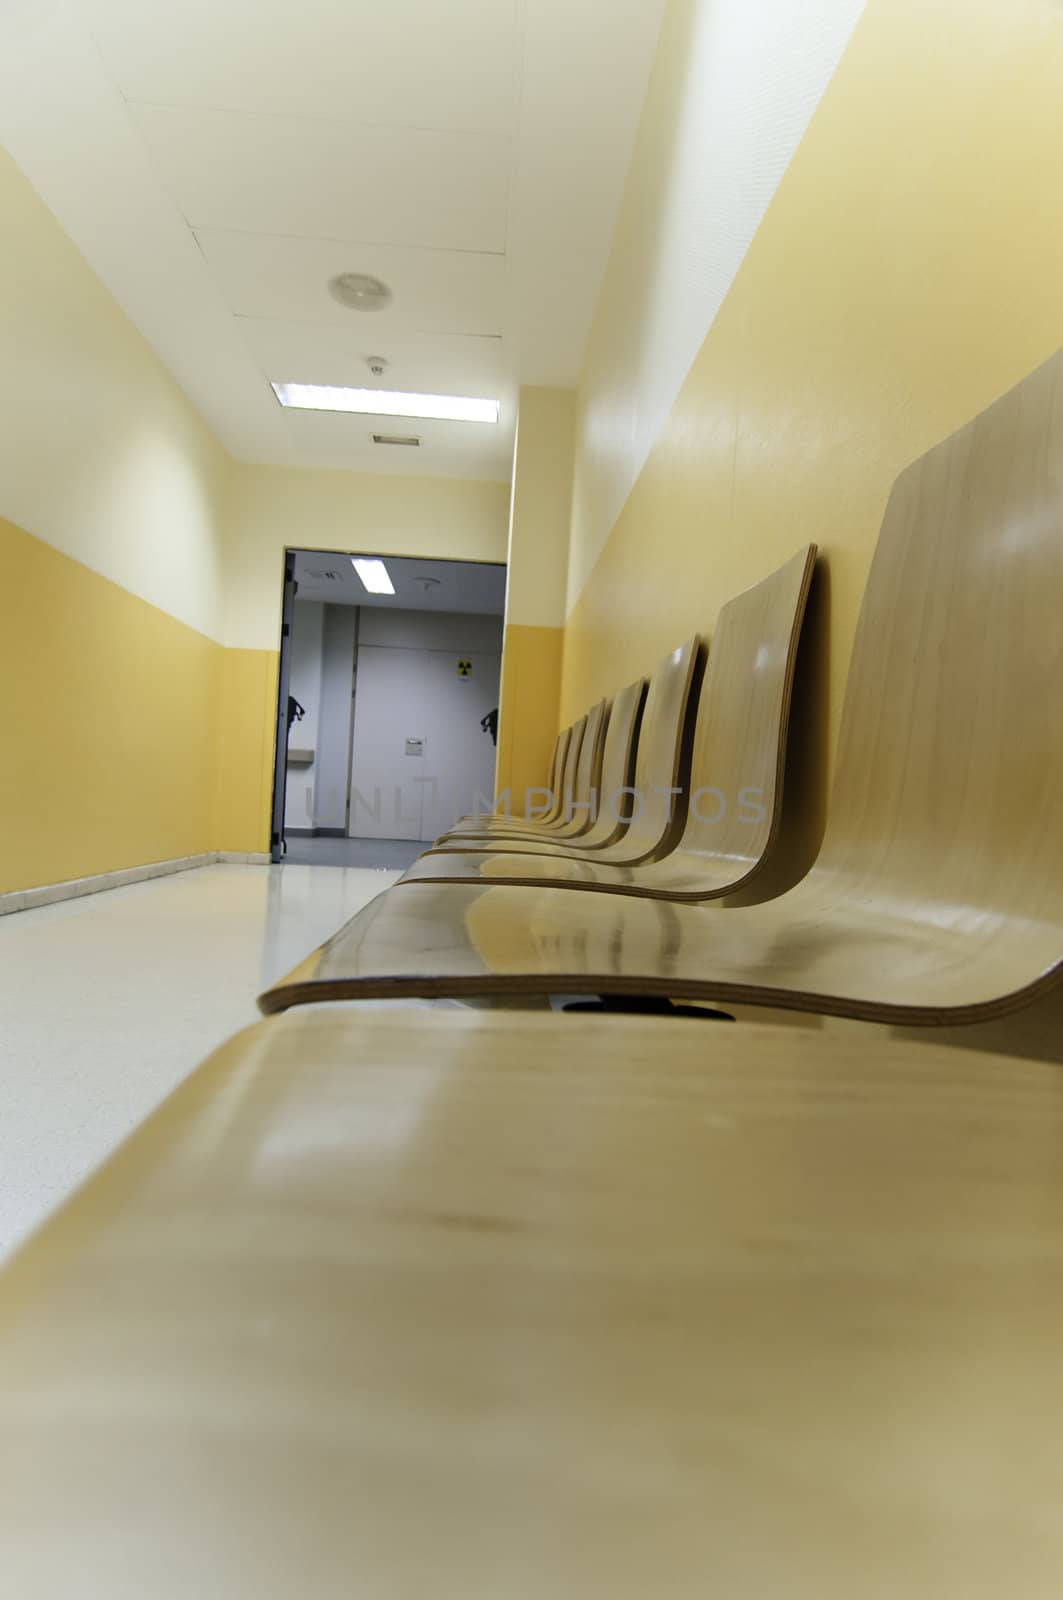 Hospital corridor picture from Spain, Europe.